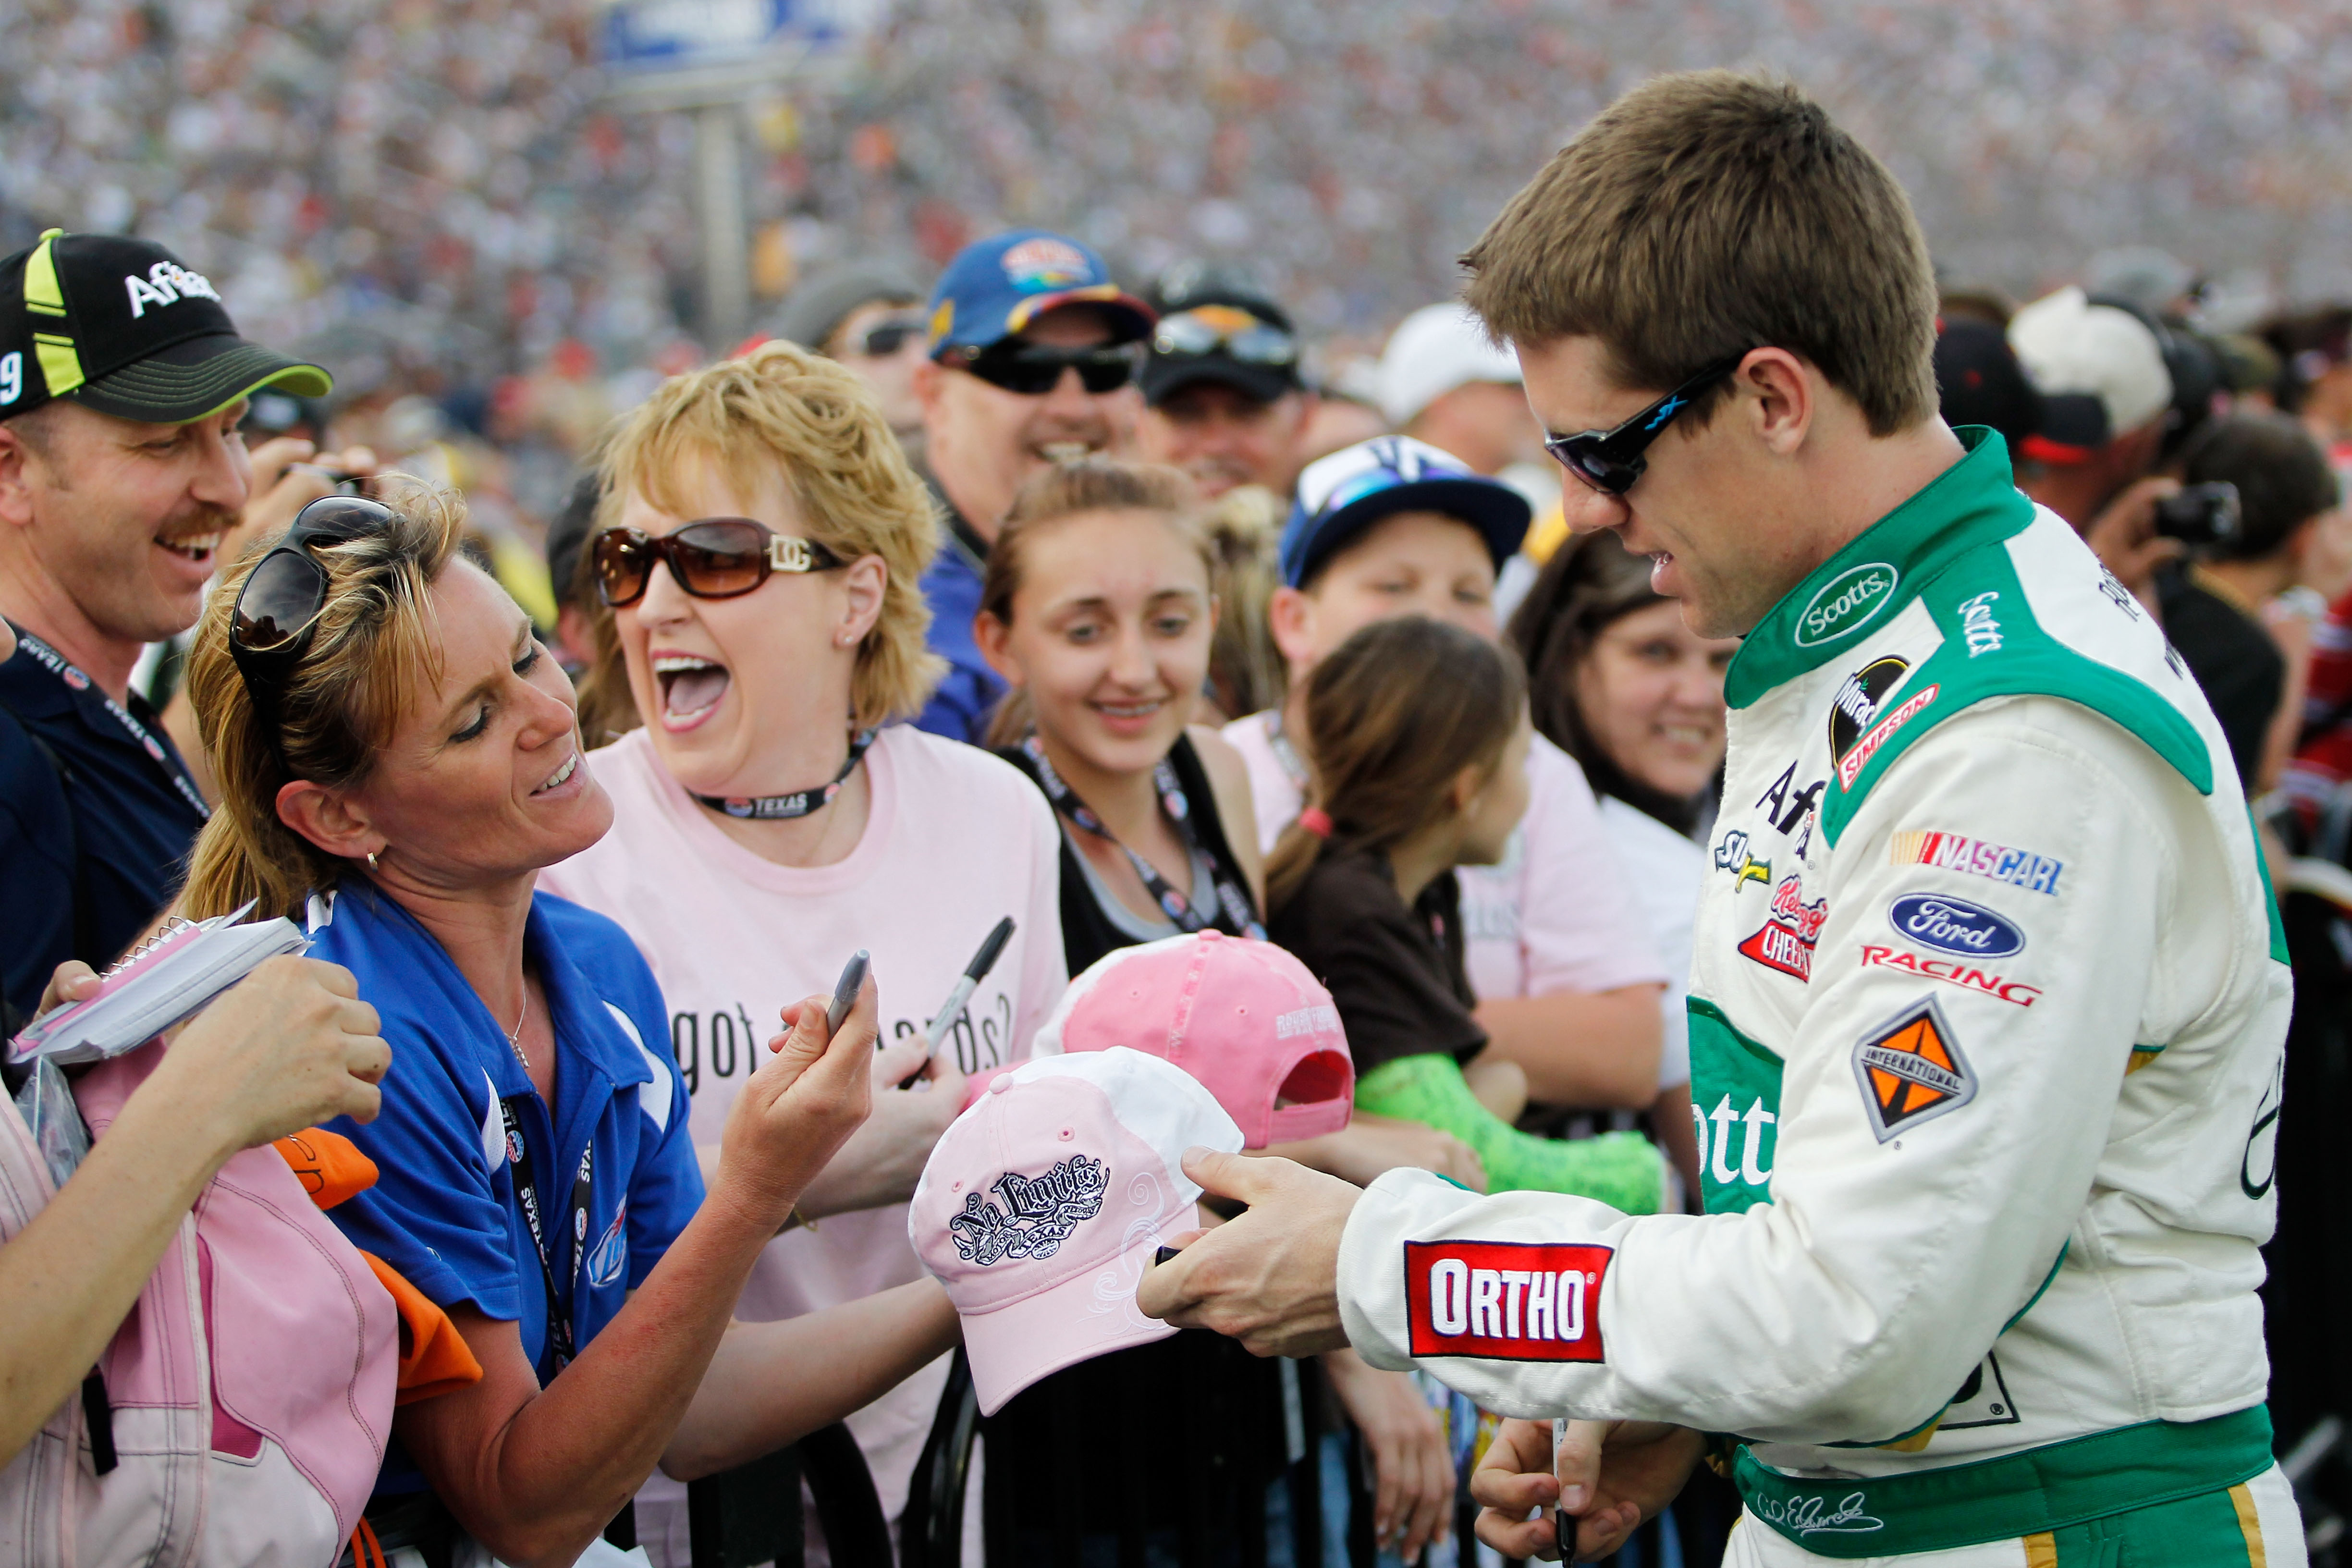 FORT WORTH, TX - APRIL 09:  Carl Edwards (R), driver of the #99 Scotts Ford, signs his autograph for fans prior to the NASCAR Sprint Cup Series Samsung Mobile 500 at Texas Motor Speedway on April 9, 2011 in Fort Worth, Texas.  (Photo by Tom Pennington/Get